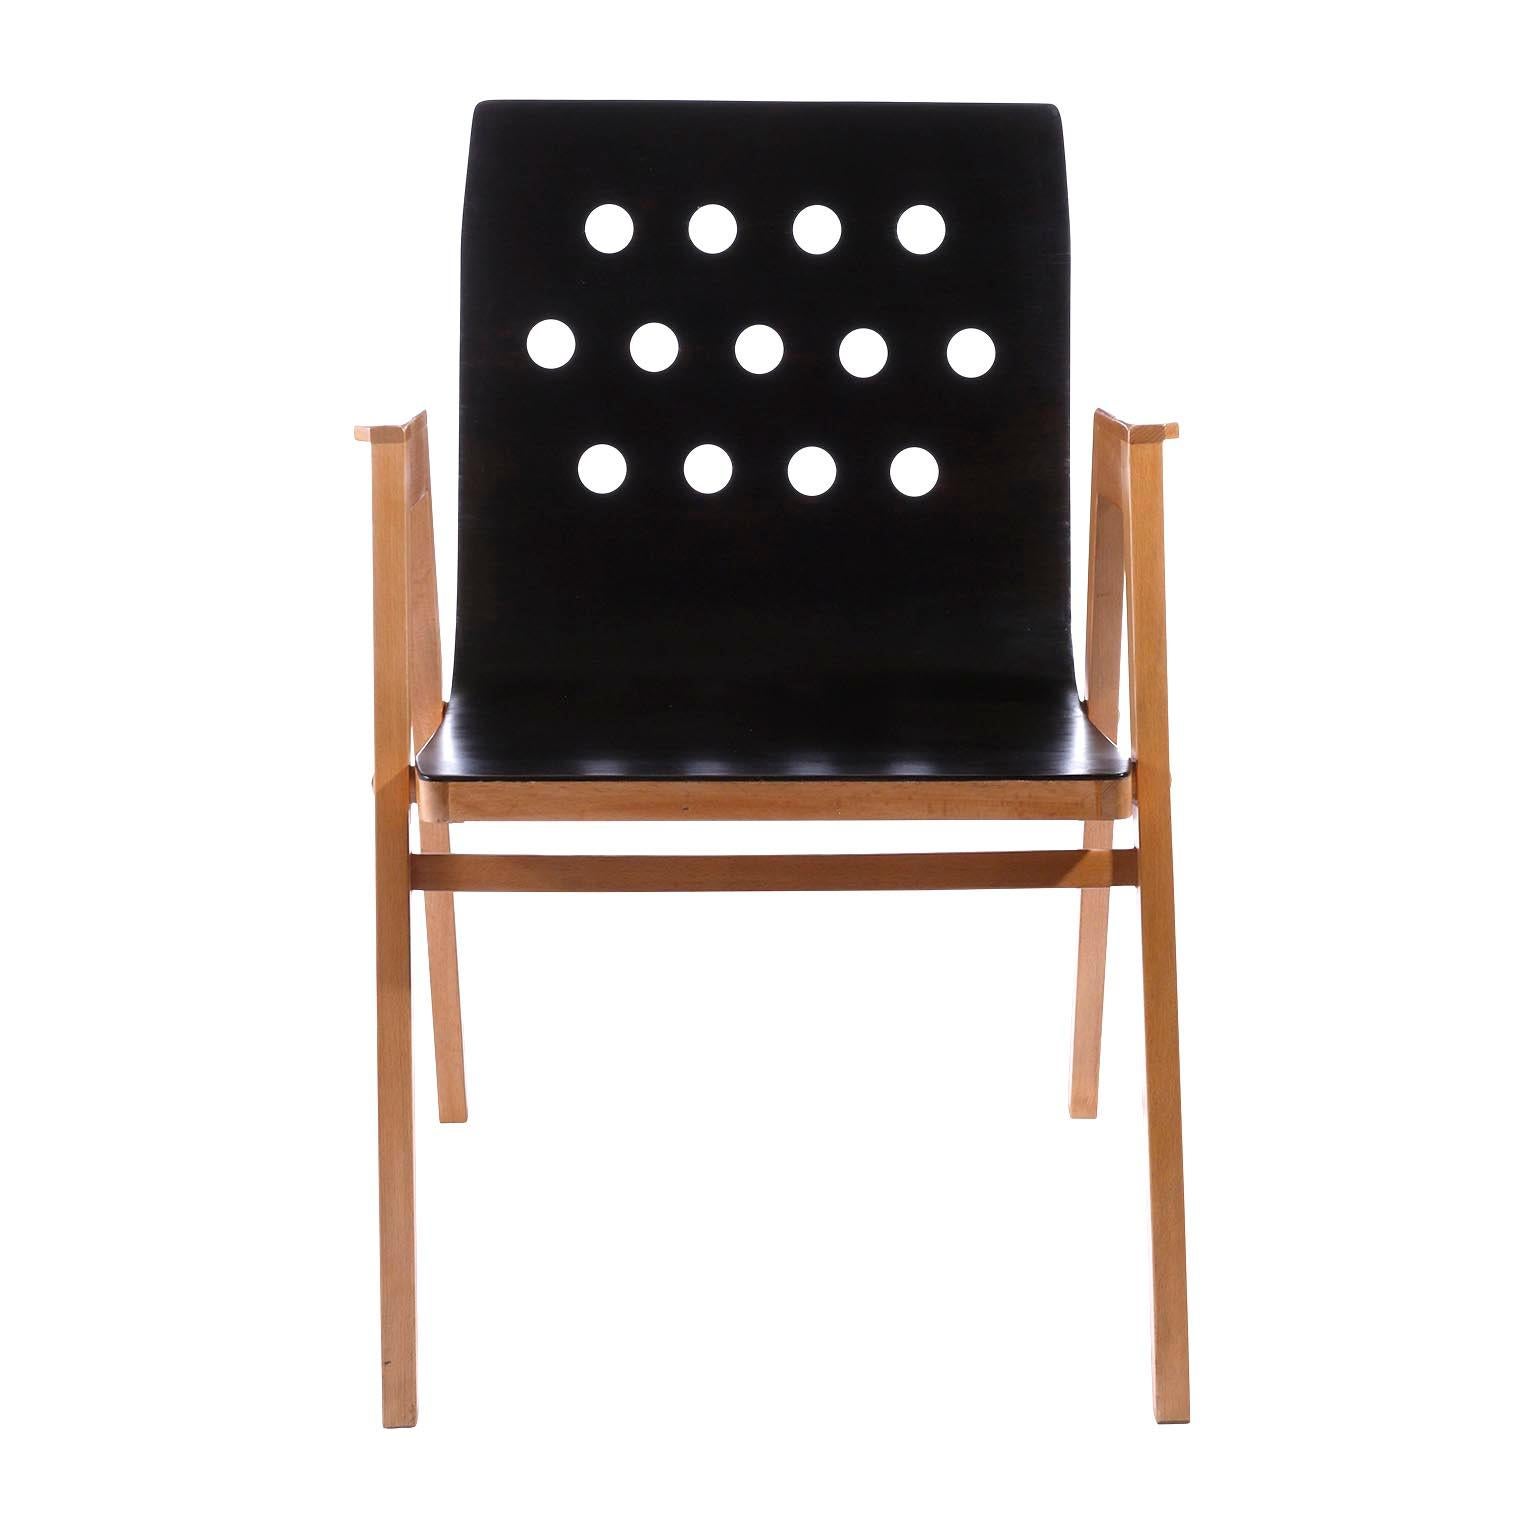 A set of twelve stackable chairs designed by Prof. Roland Rainer in 1951 and manufactured by Emil & Alfred Pollak, Austria, in 1950s.
Roland Rainer used these chairs for the Viennese city hall 